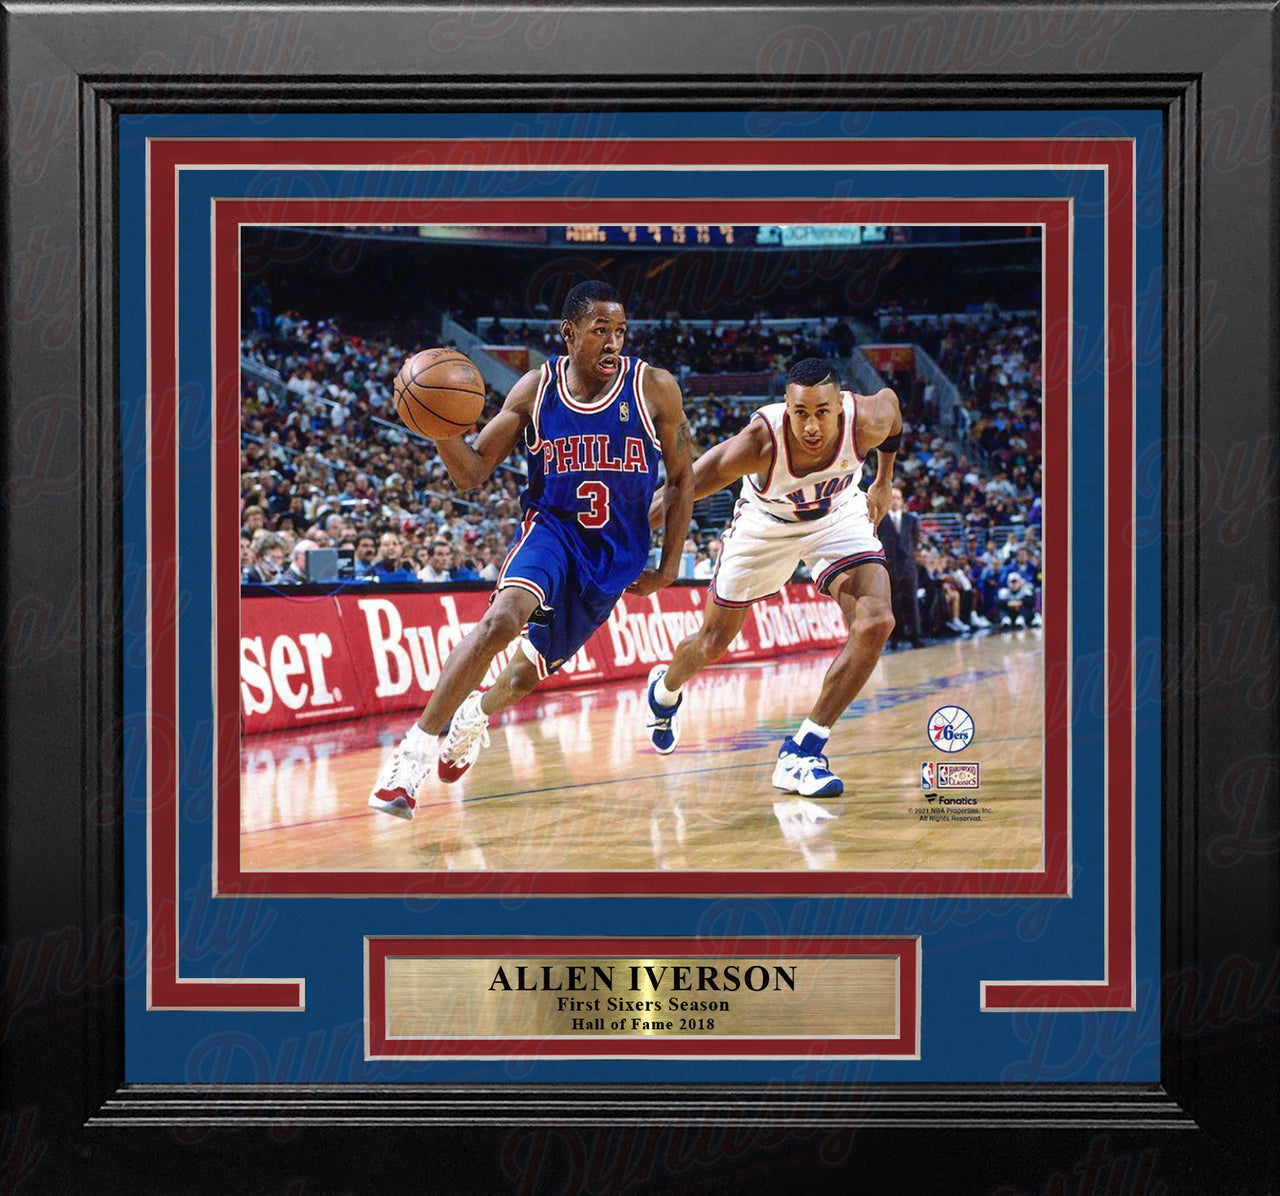 Allen Iverson Rookie Year Action Philadelphia 76ers 8" x 10" Framed Basketball Photo - Dynasty Sports & Framing 